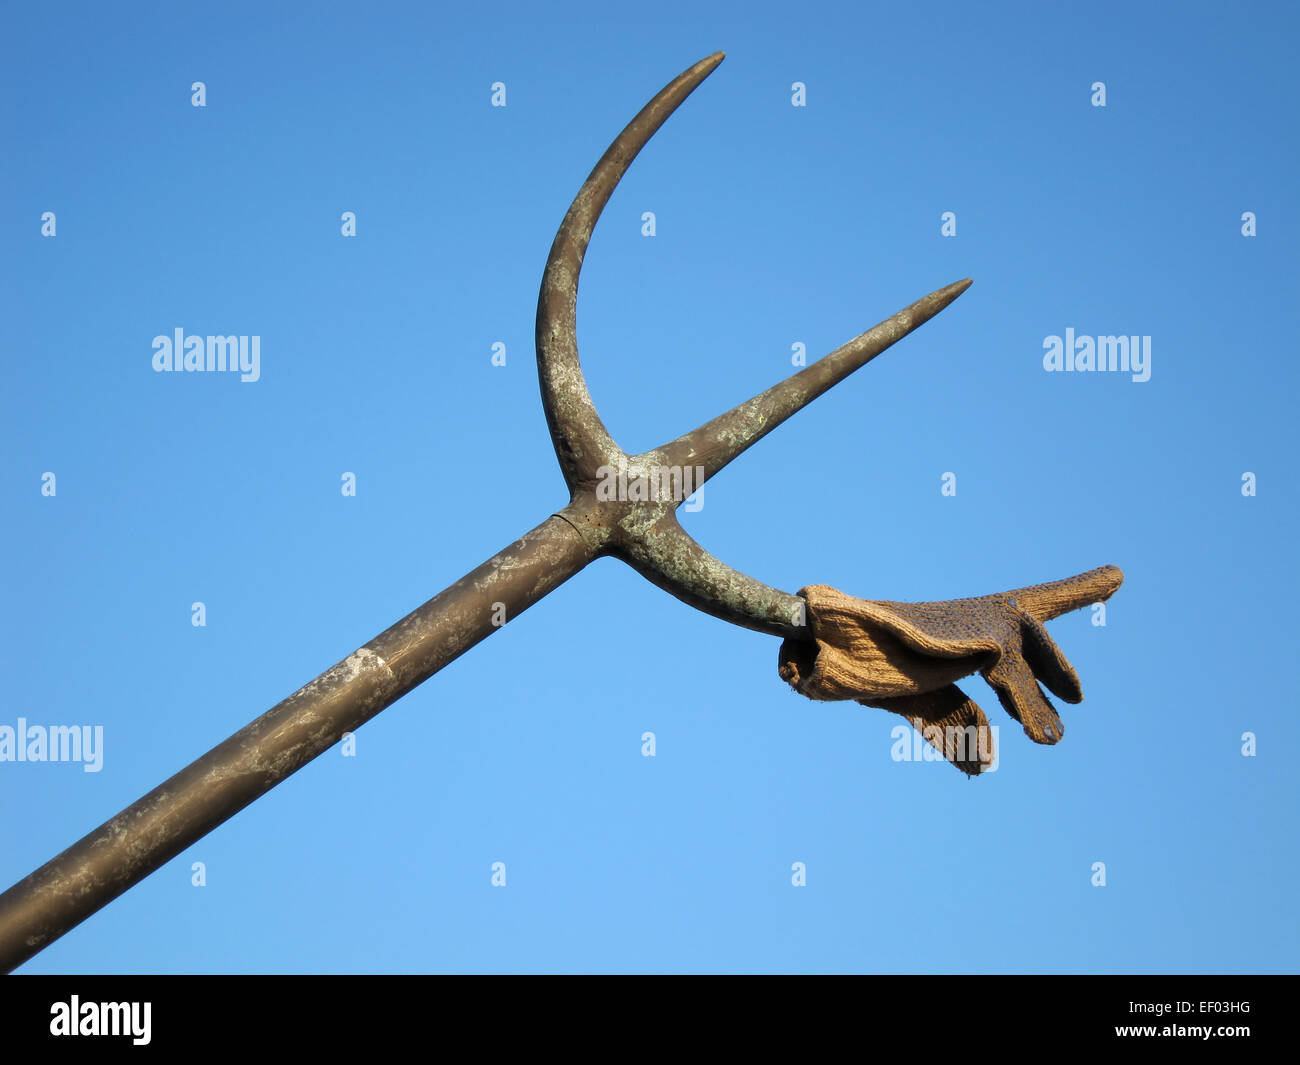 A trident as a guide. Stock Photo